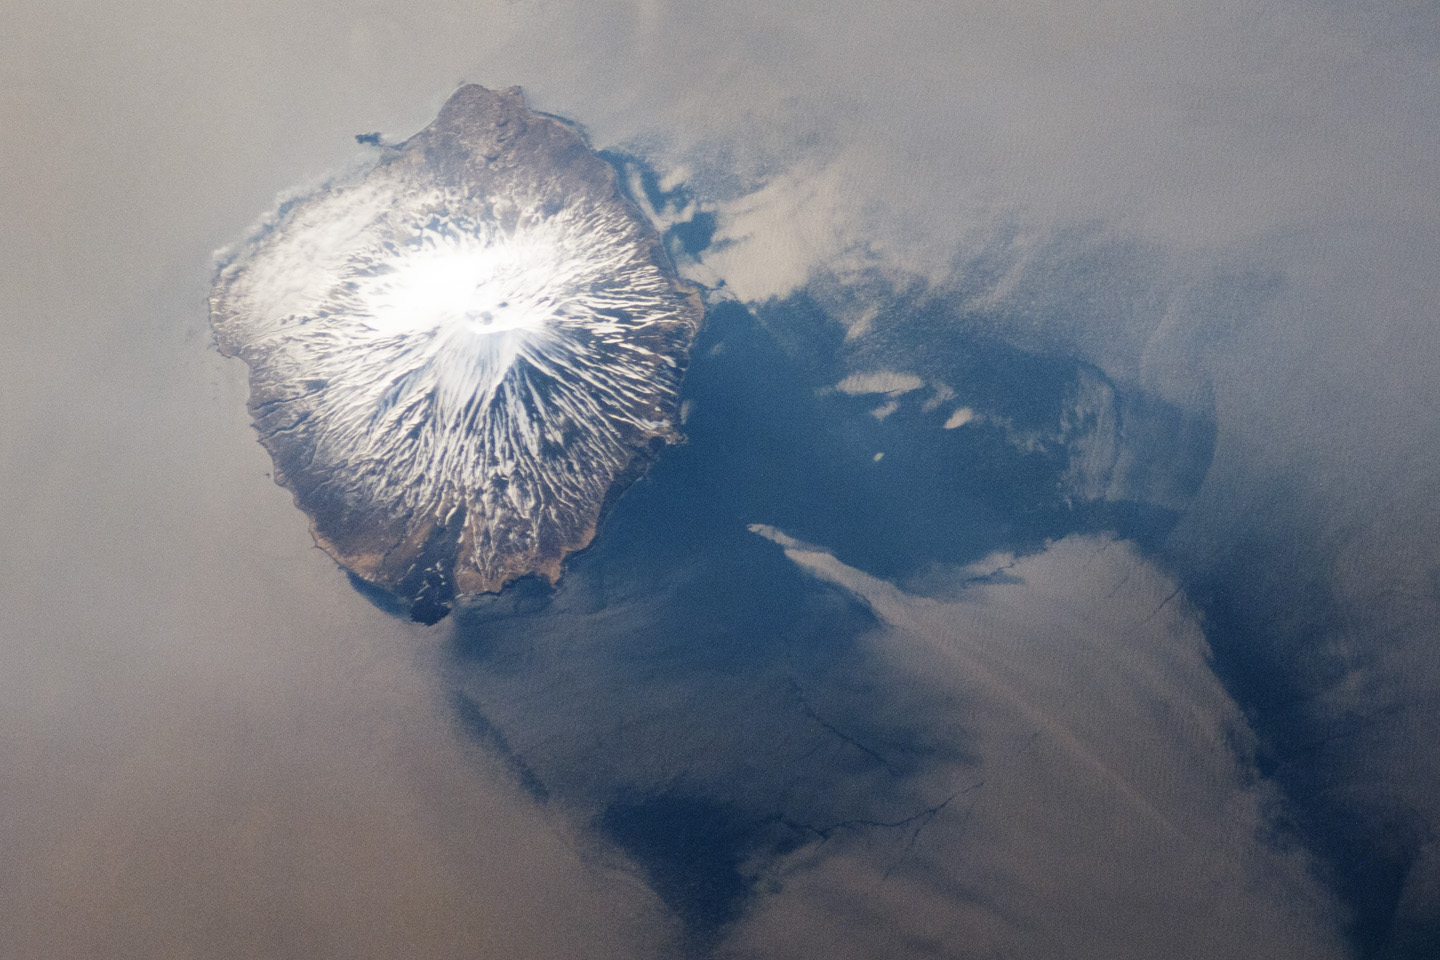 Alaid Volcano, Kuril Islands, Russian Federation - related image preview